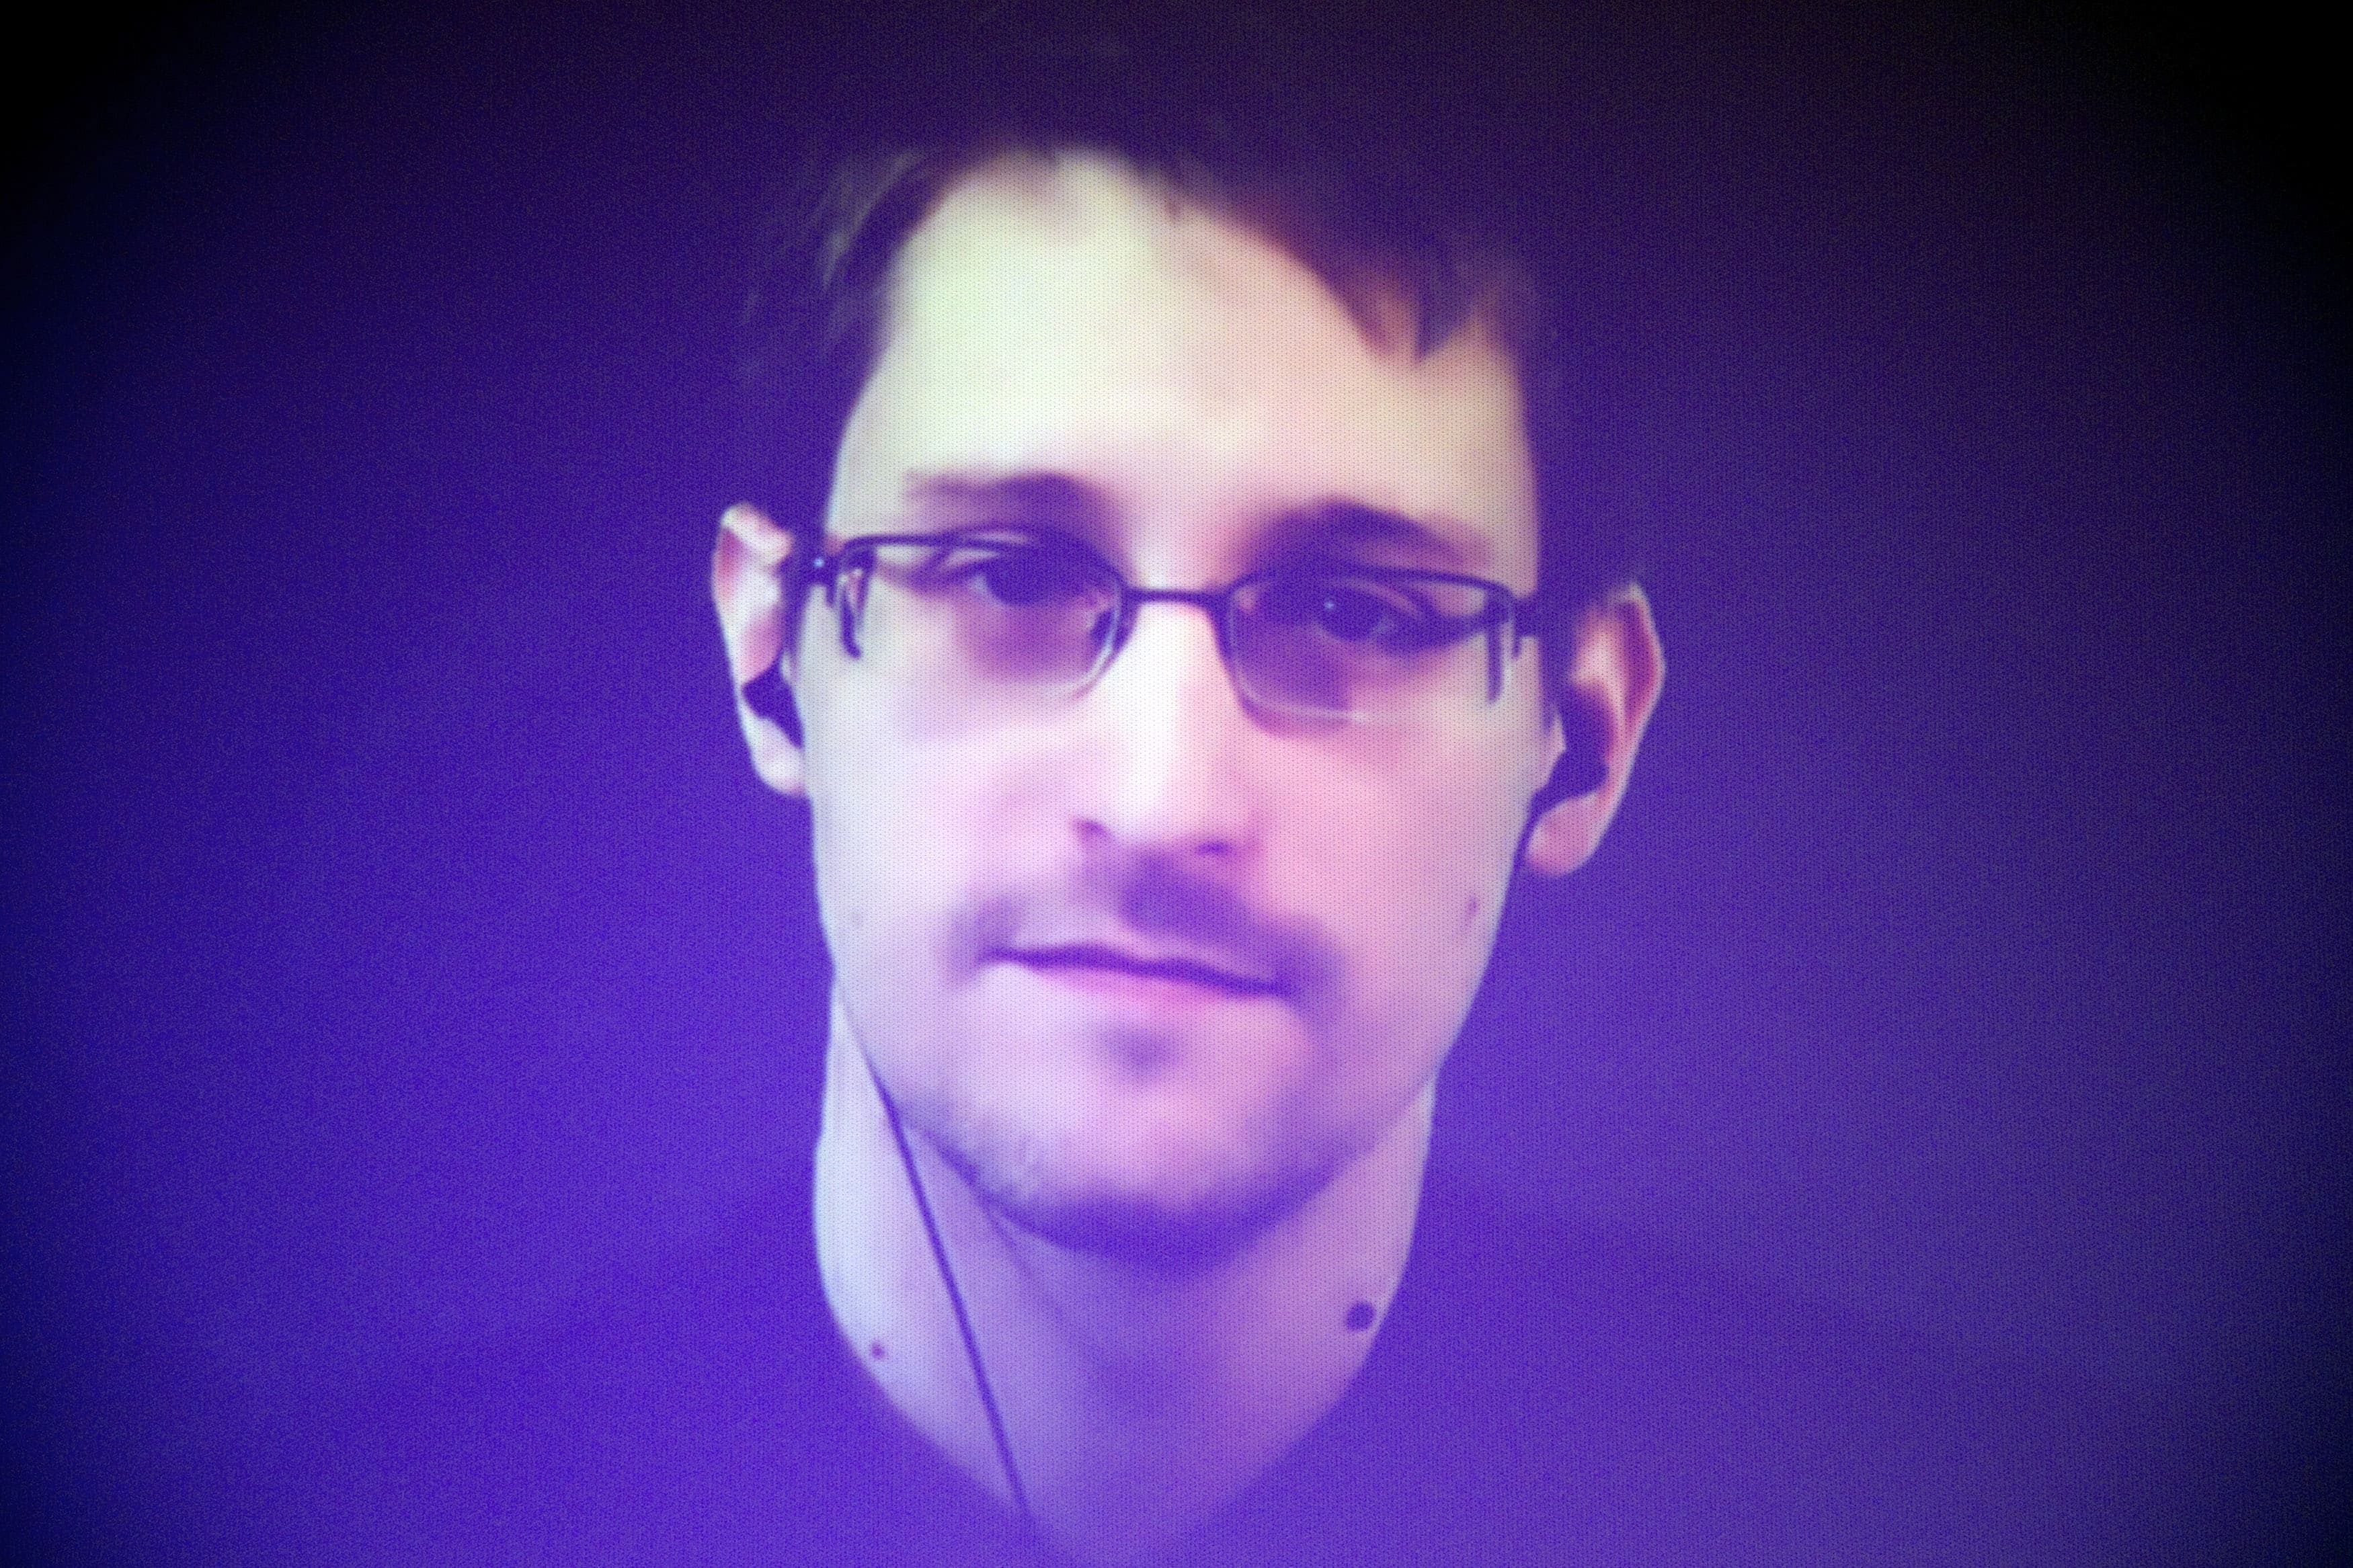 Edward Snowden is seen on a giant screen during a live video conference as part of Amnesty International's annual Write for Rights campaign at the Gaite Lyrique in Paris, France, Dec. 10, 2014, AP Photo/Charles Platiau, Pool